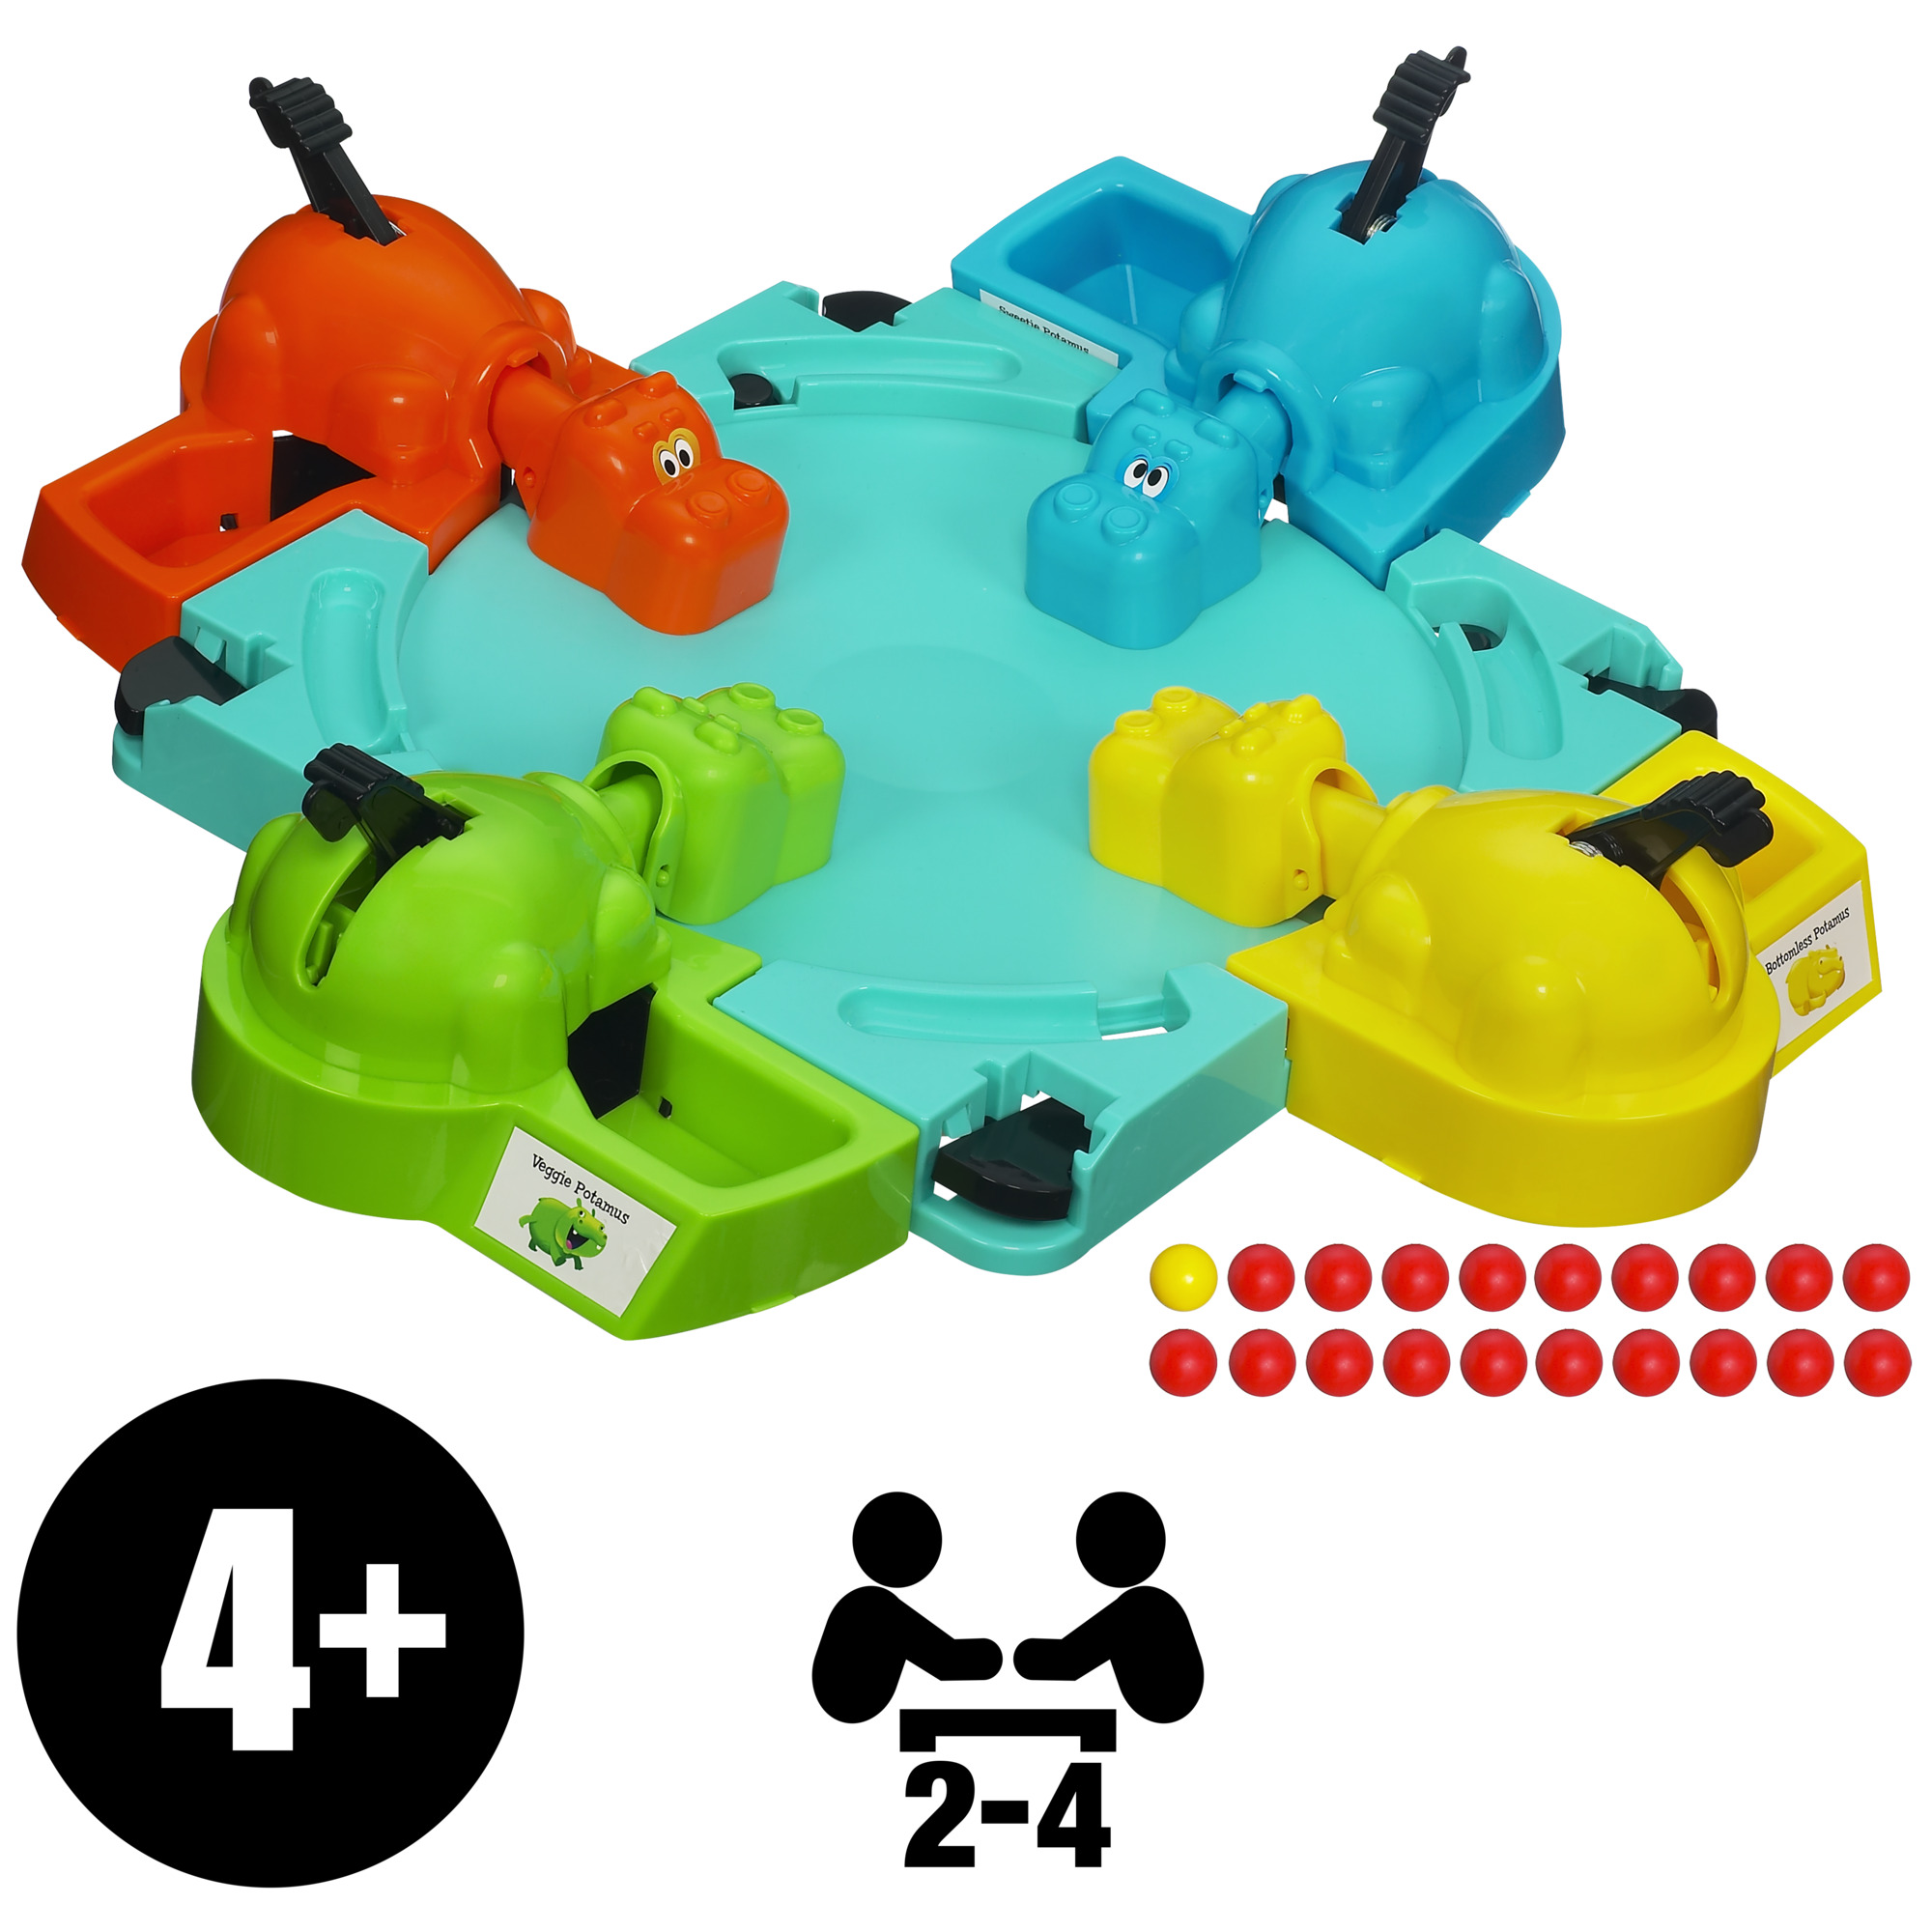 Elefun & Friends Hungry Hungry Hippos Board Game, 2-4 Players - image 2 of 11